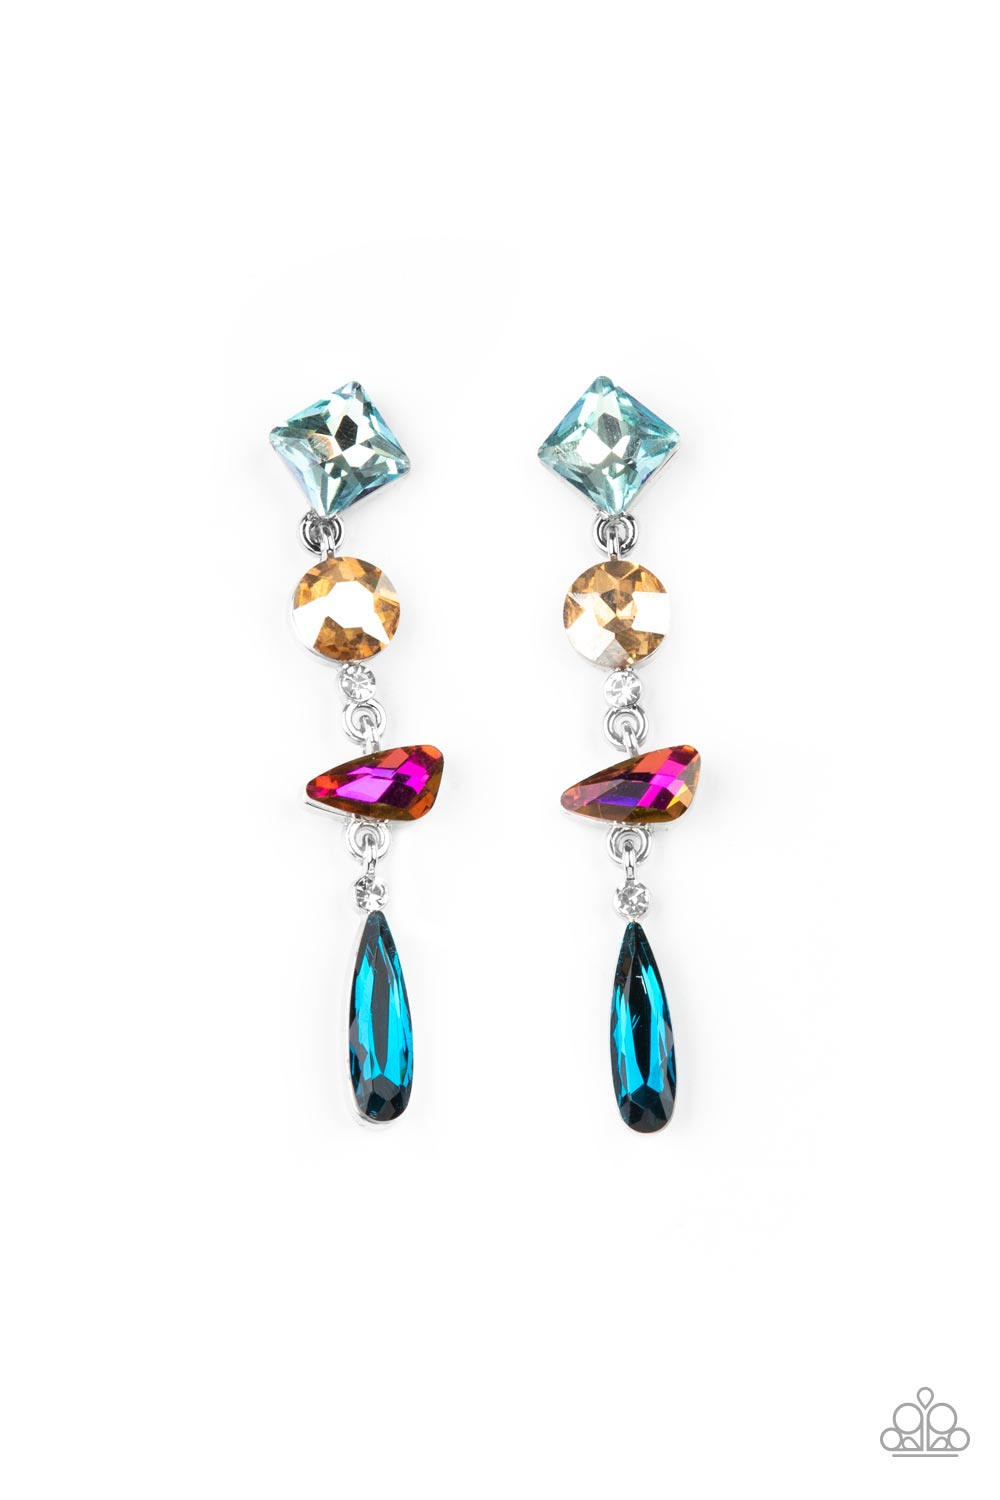 Gemstones Accessories, Candy Crystal Jewelry